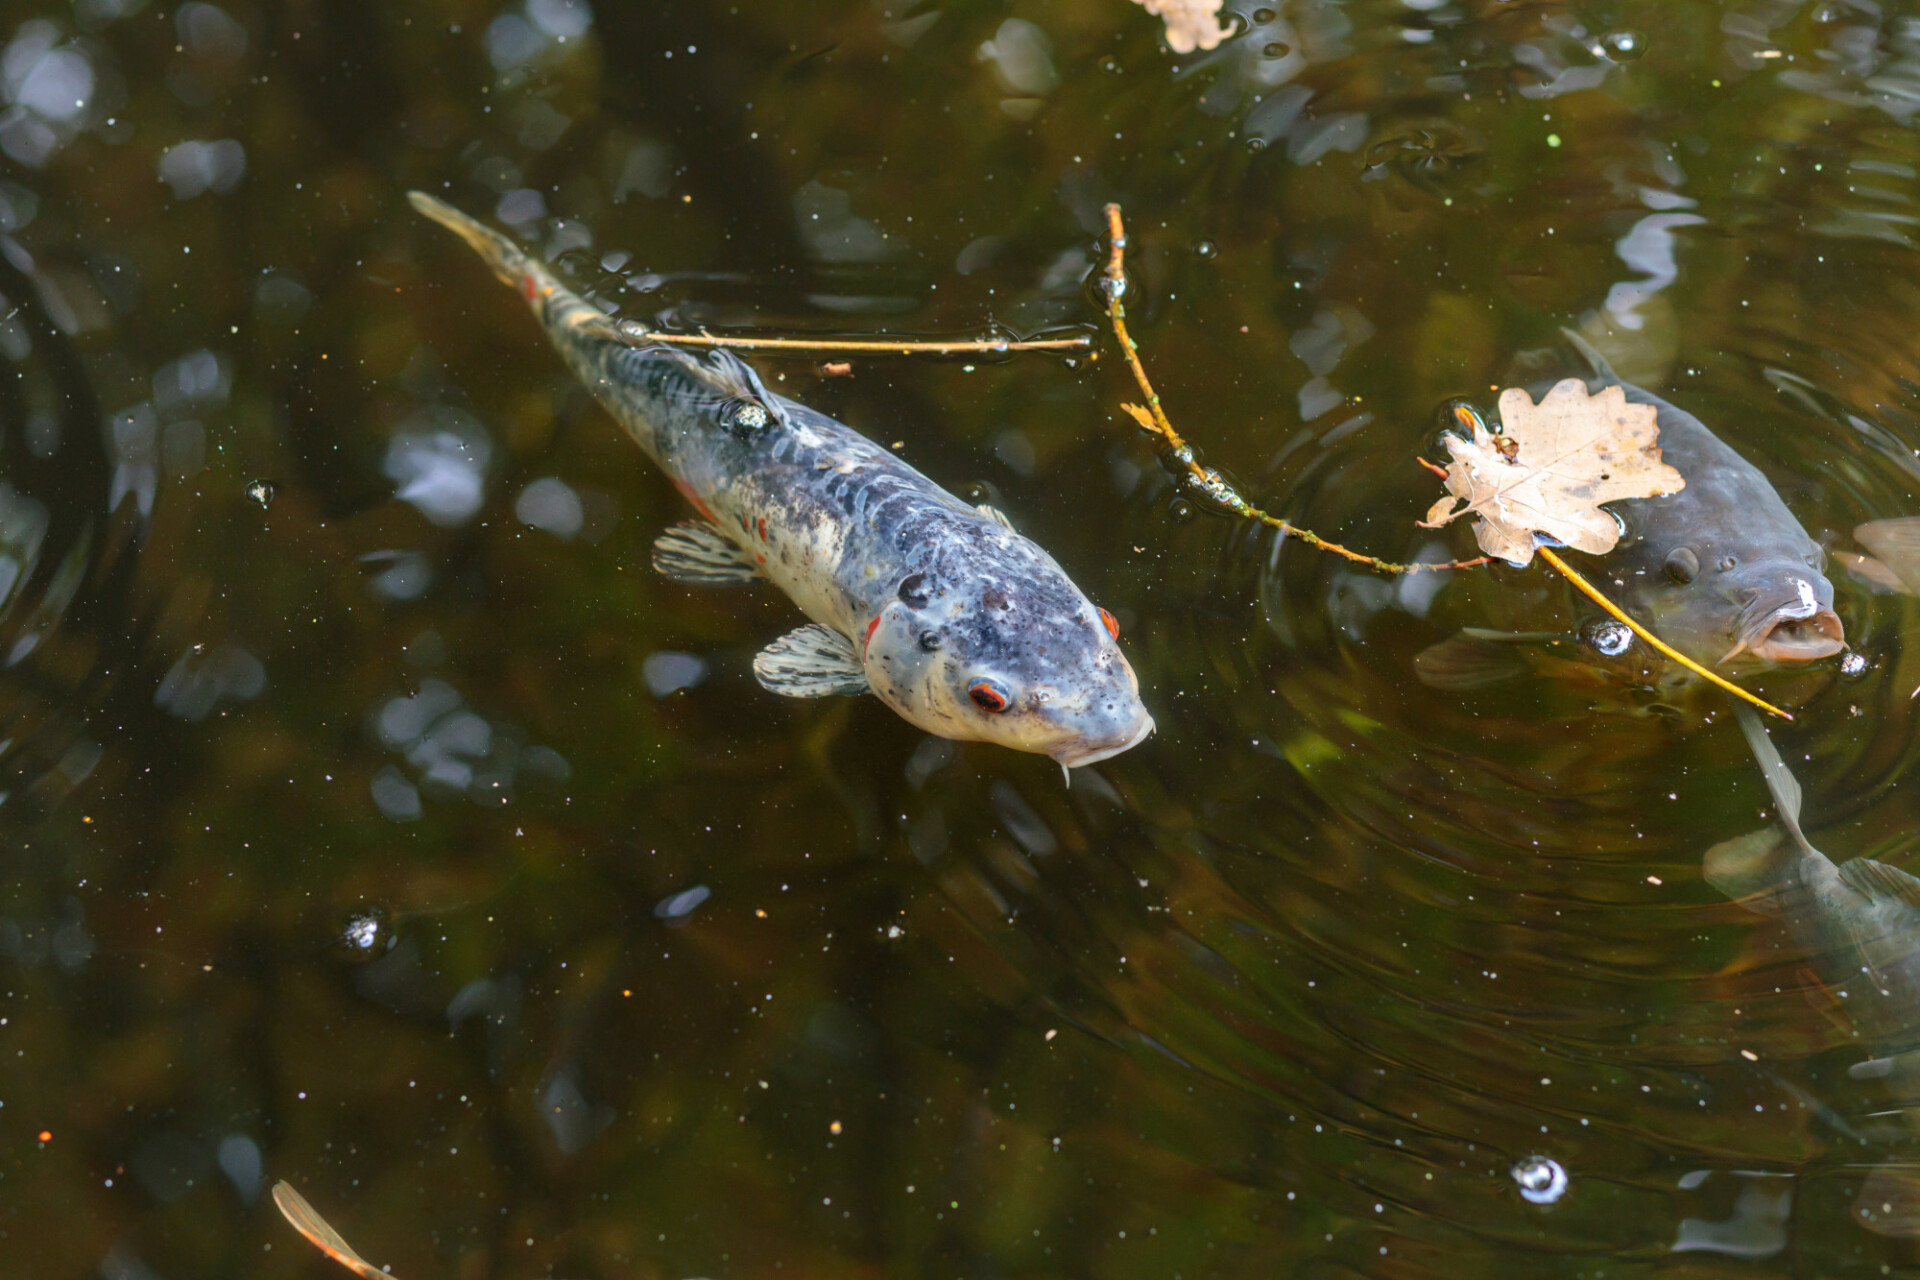 Curious fish in a pond